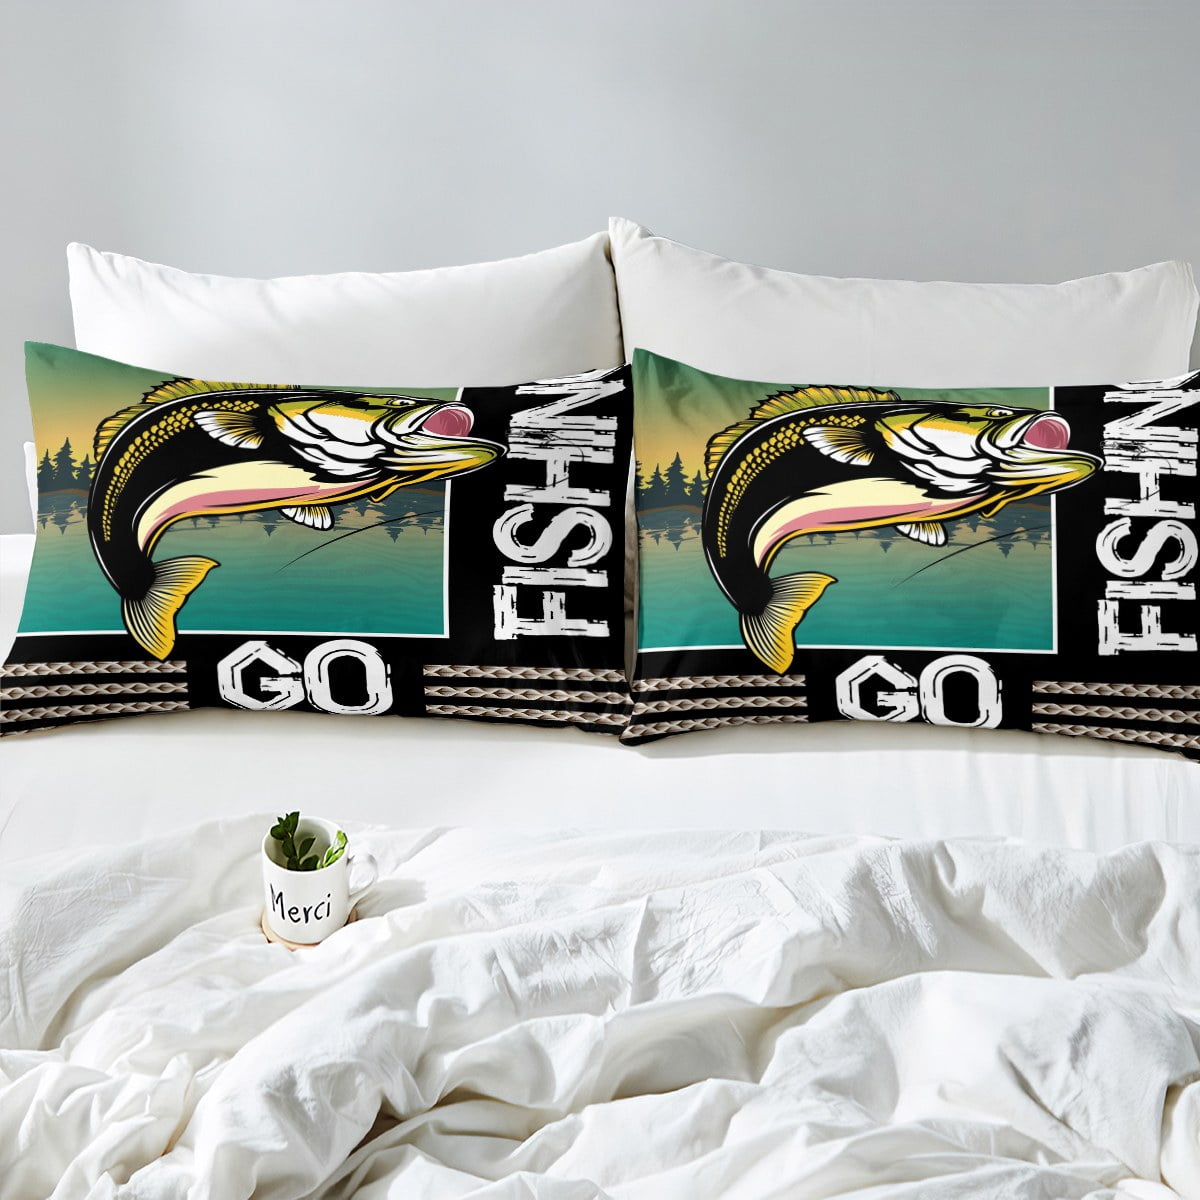 YST Bass Big Fish Comforter Cover Queen Size,Pike Big Fish Bedding Set Eat  Small Fish Duvet Cover For Kids Boys Teen Men Ocean Fishing Bedspread Cover  With Zipper 2 Pillow Cases Green